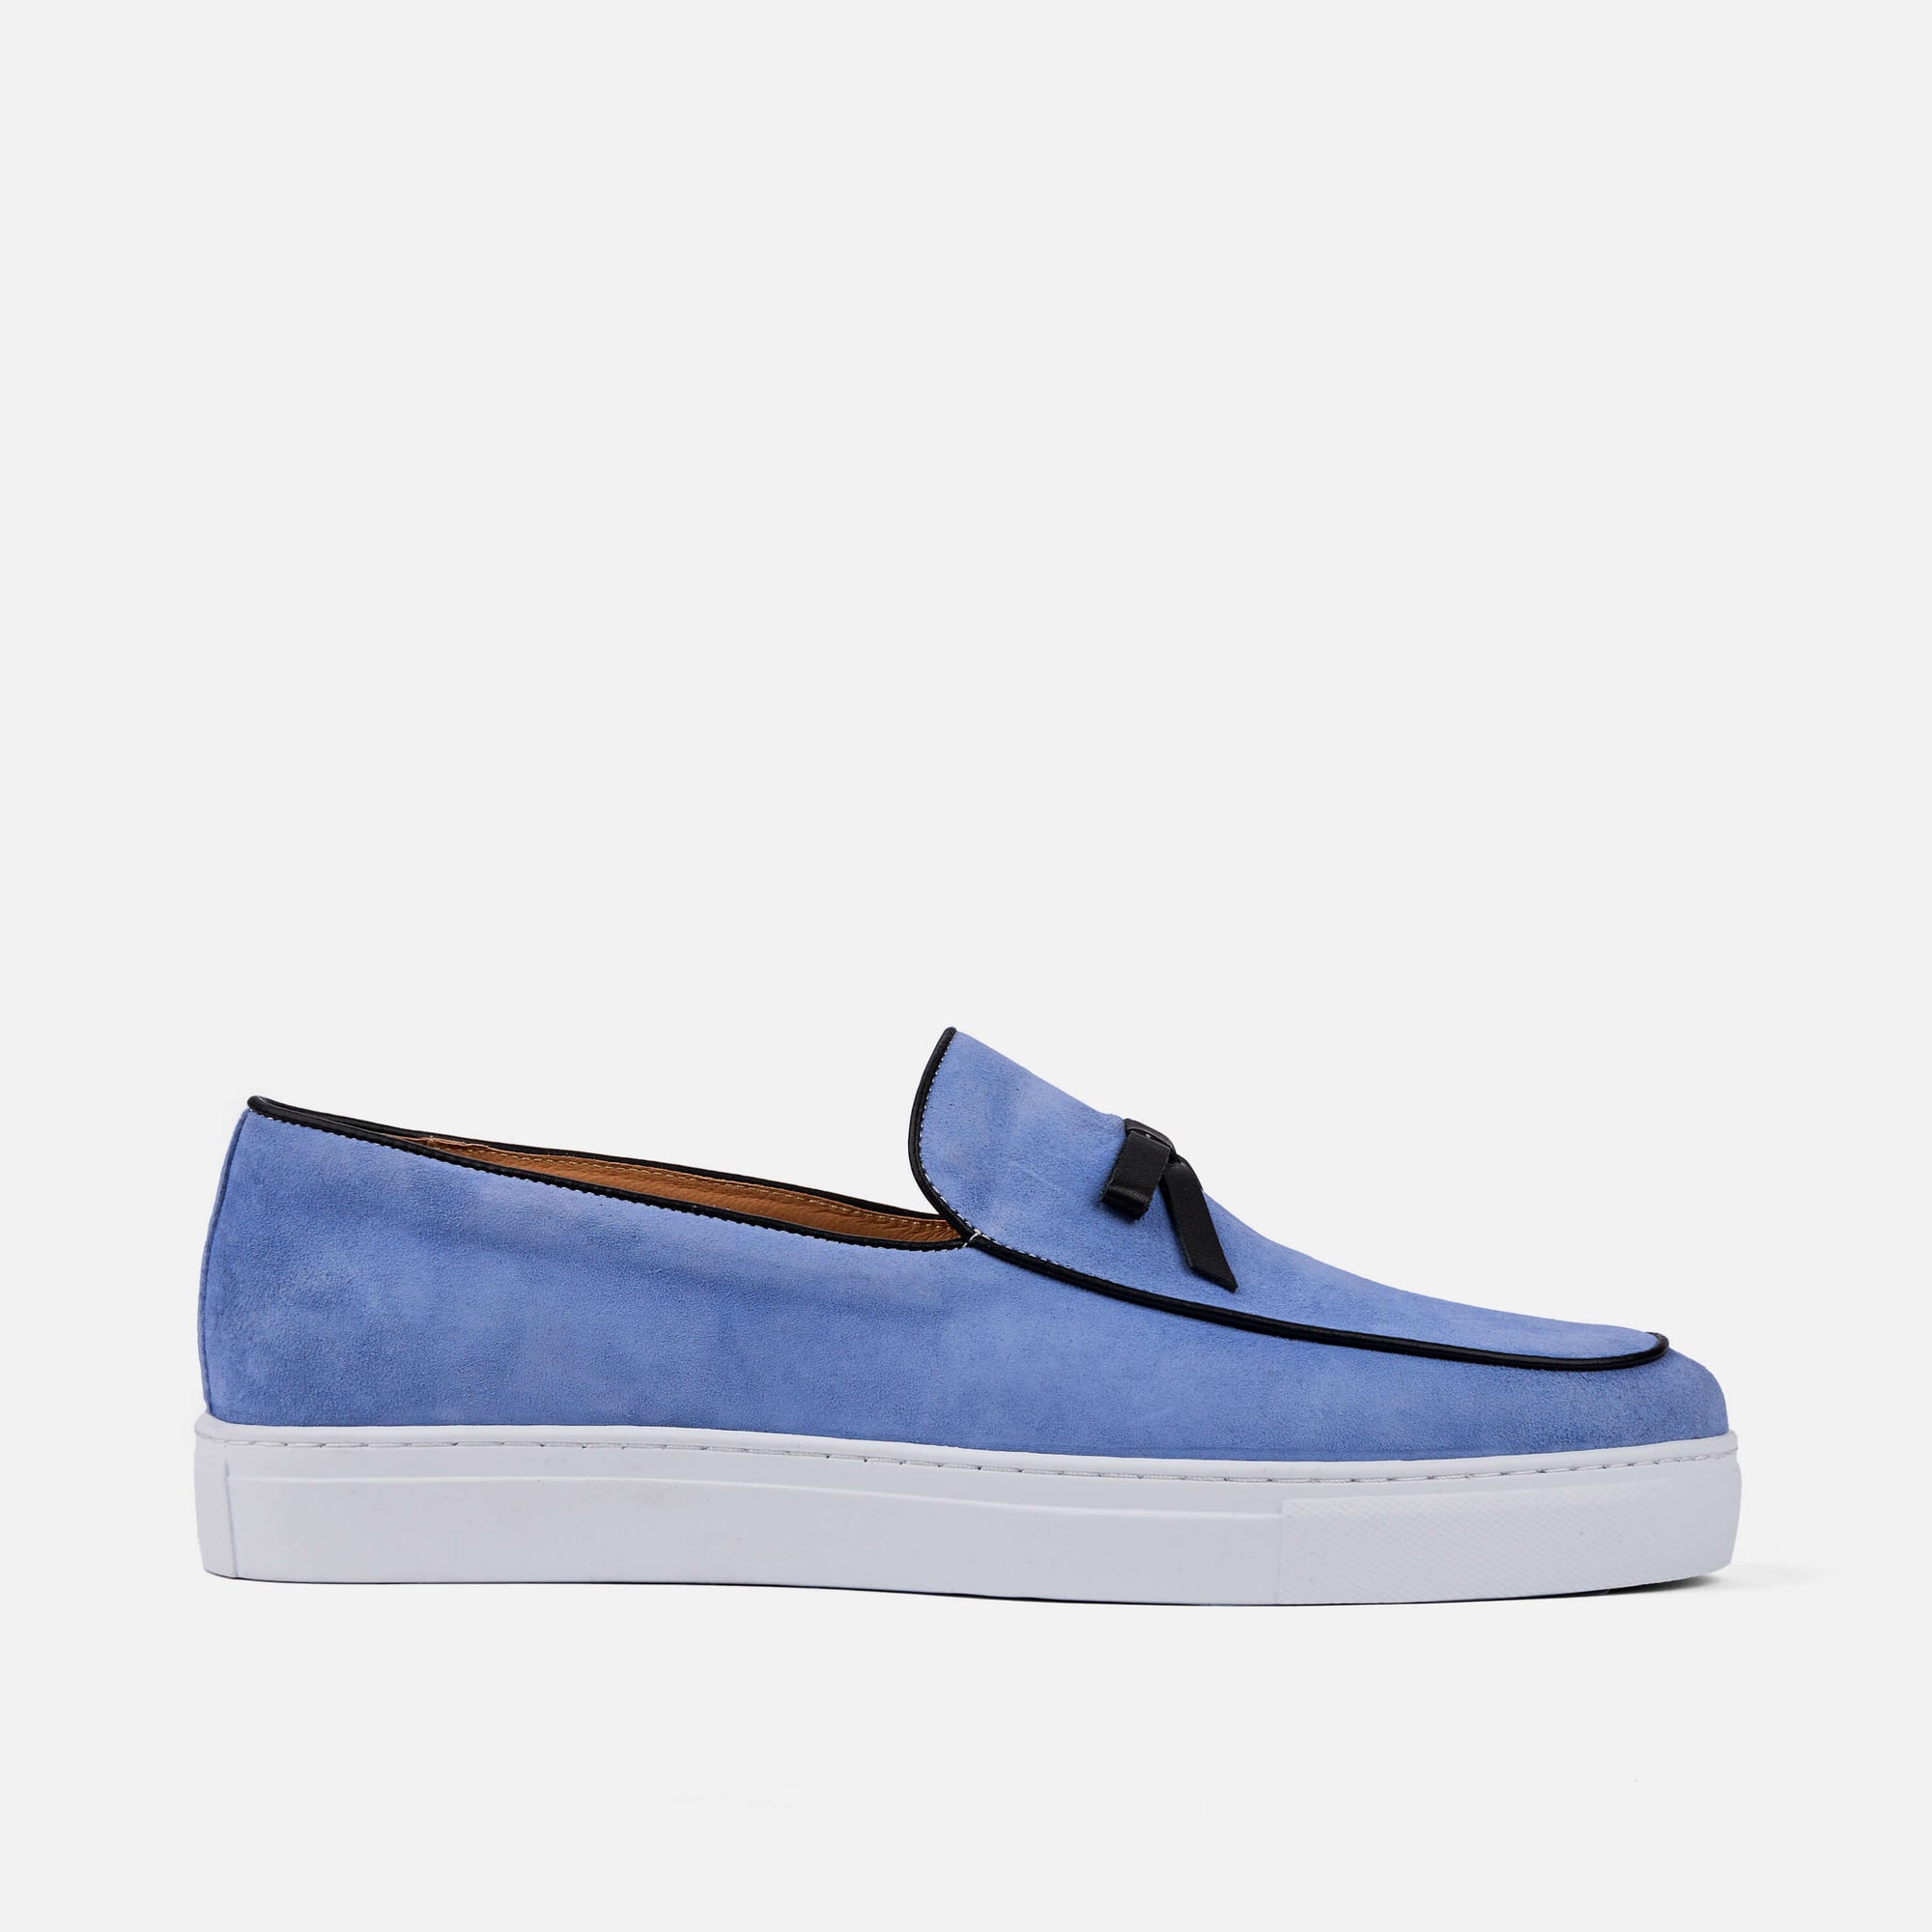 Odell Ivy Blue Suede Belgian Loafer Sneakers